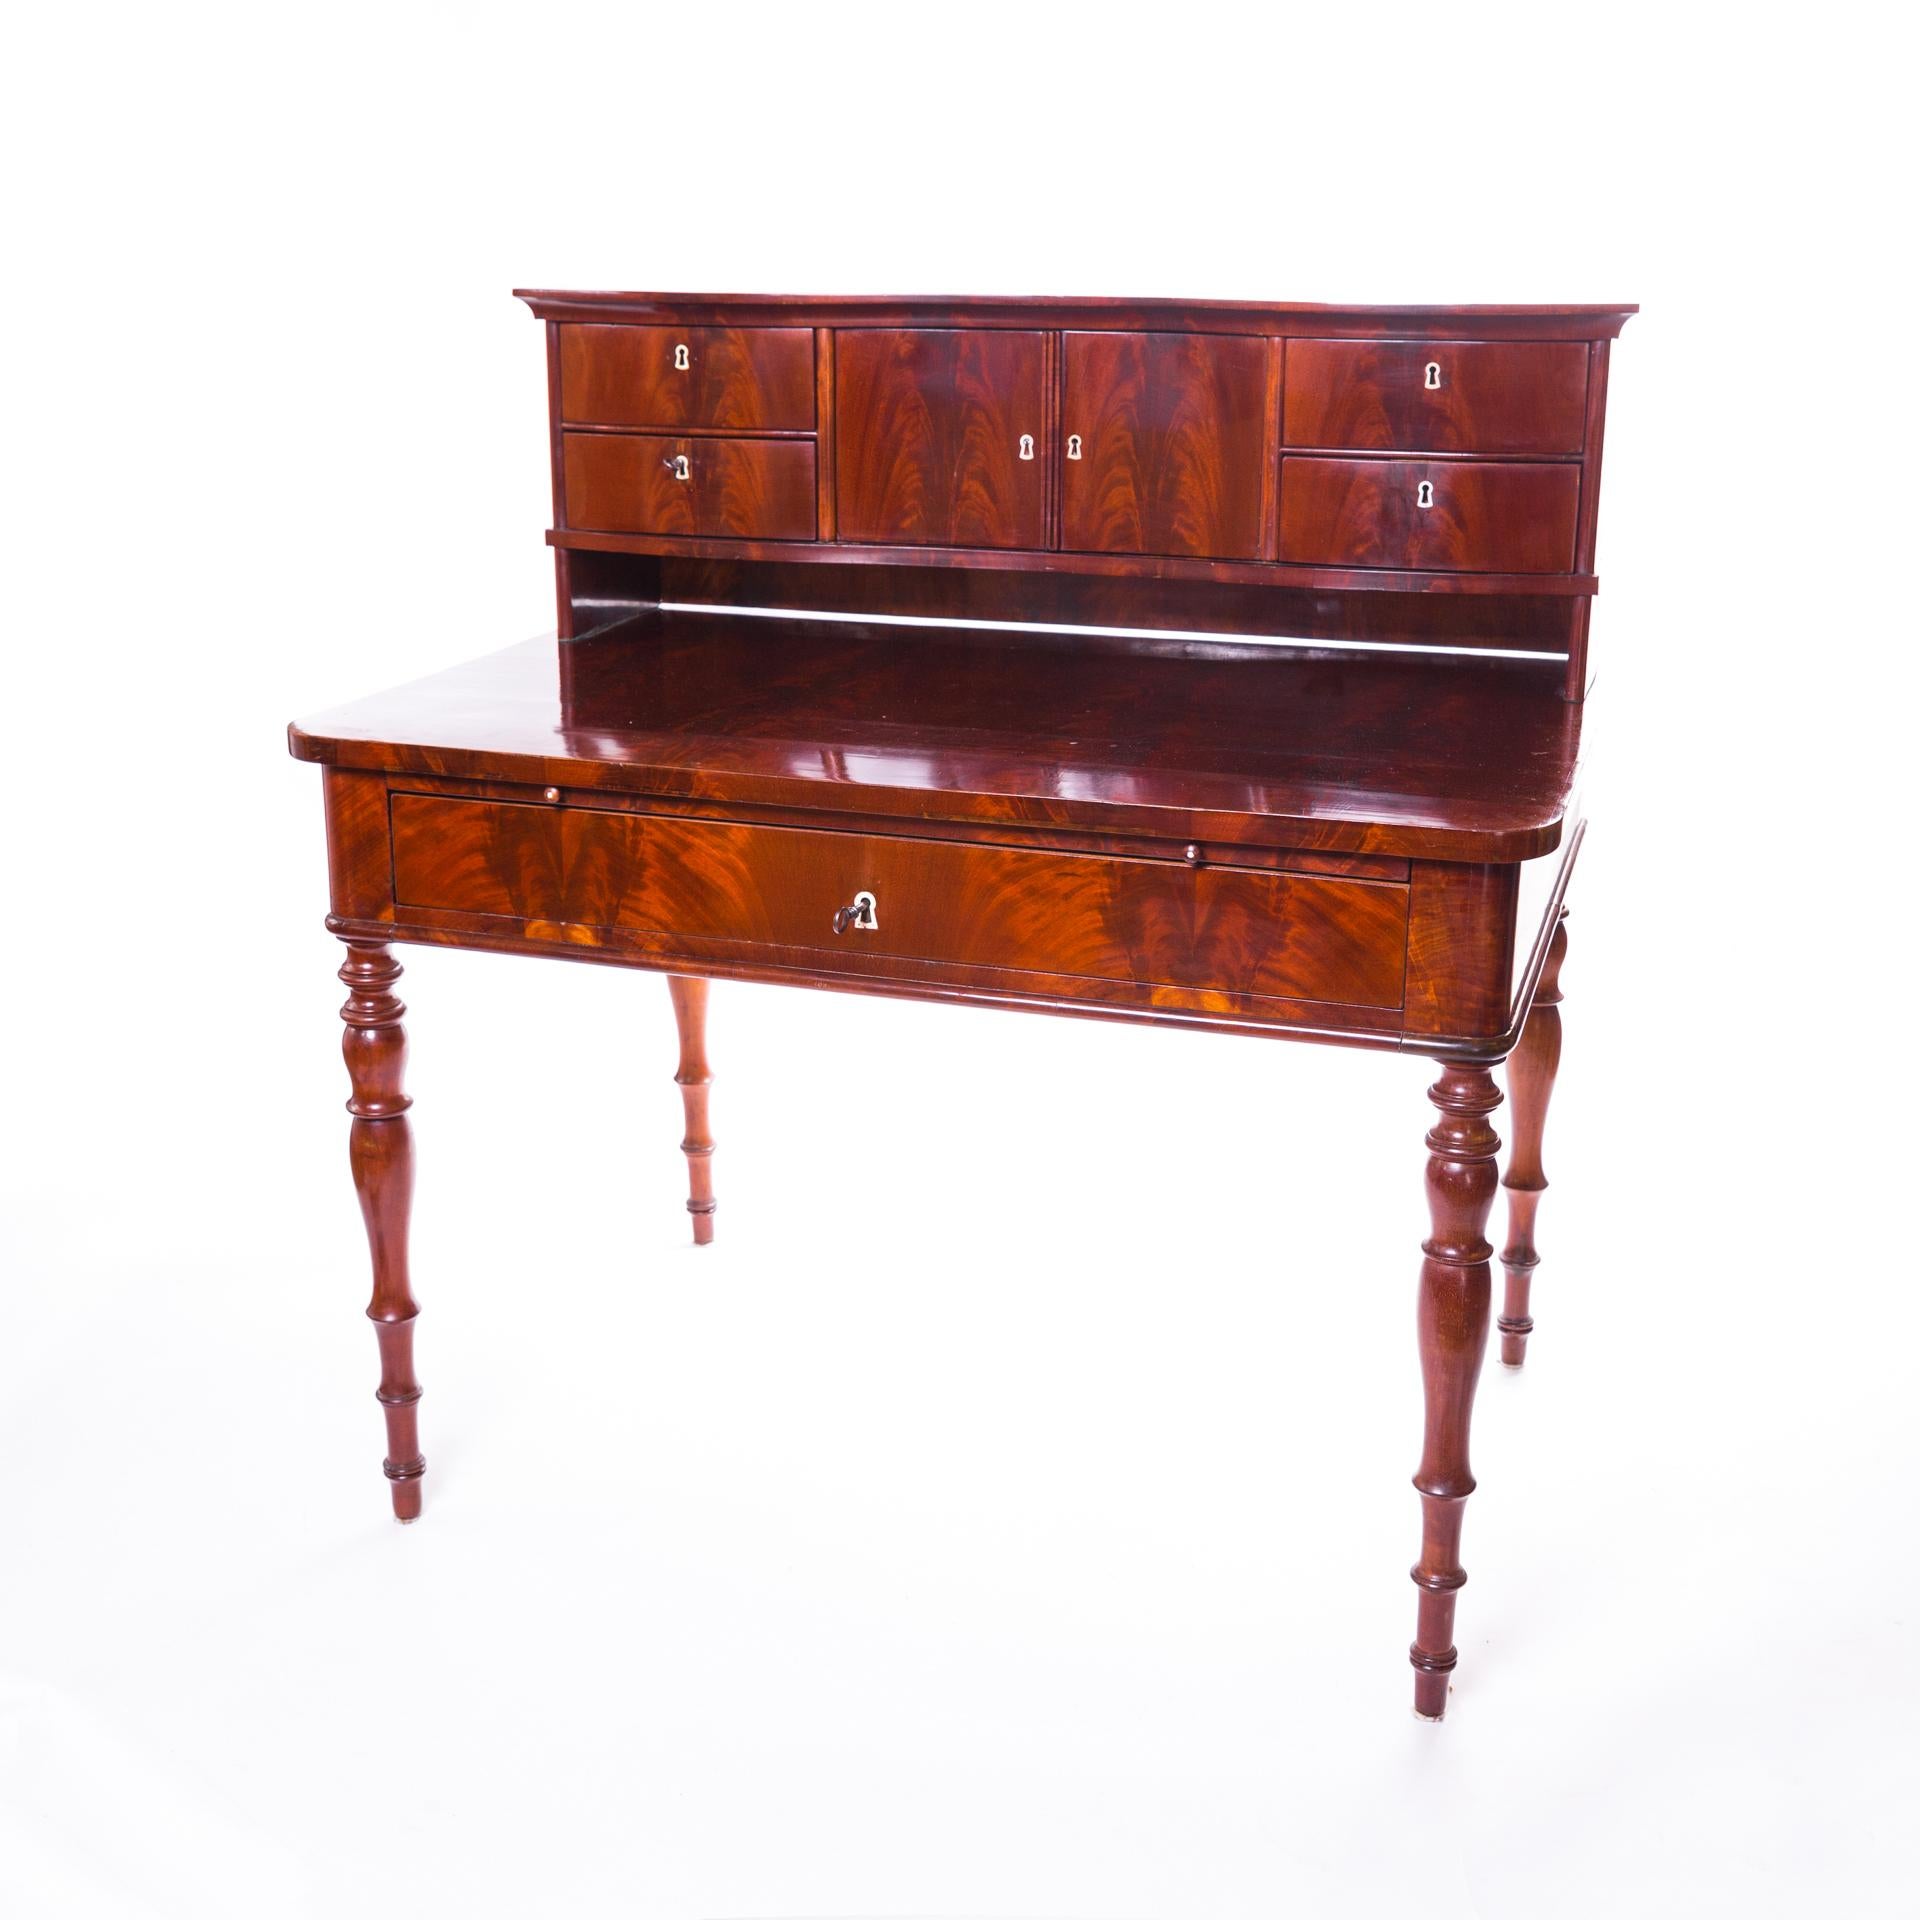 Mid-19th Century Biedermeier Desk with Extension, Polished Mahogany, Dark, Wooden, circa 1840 For Sale